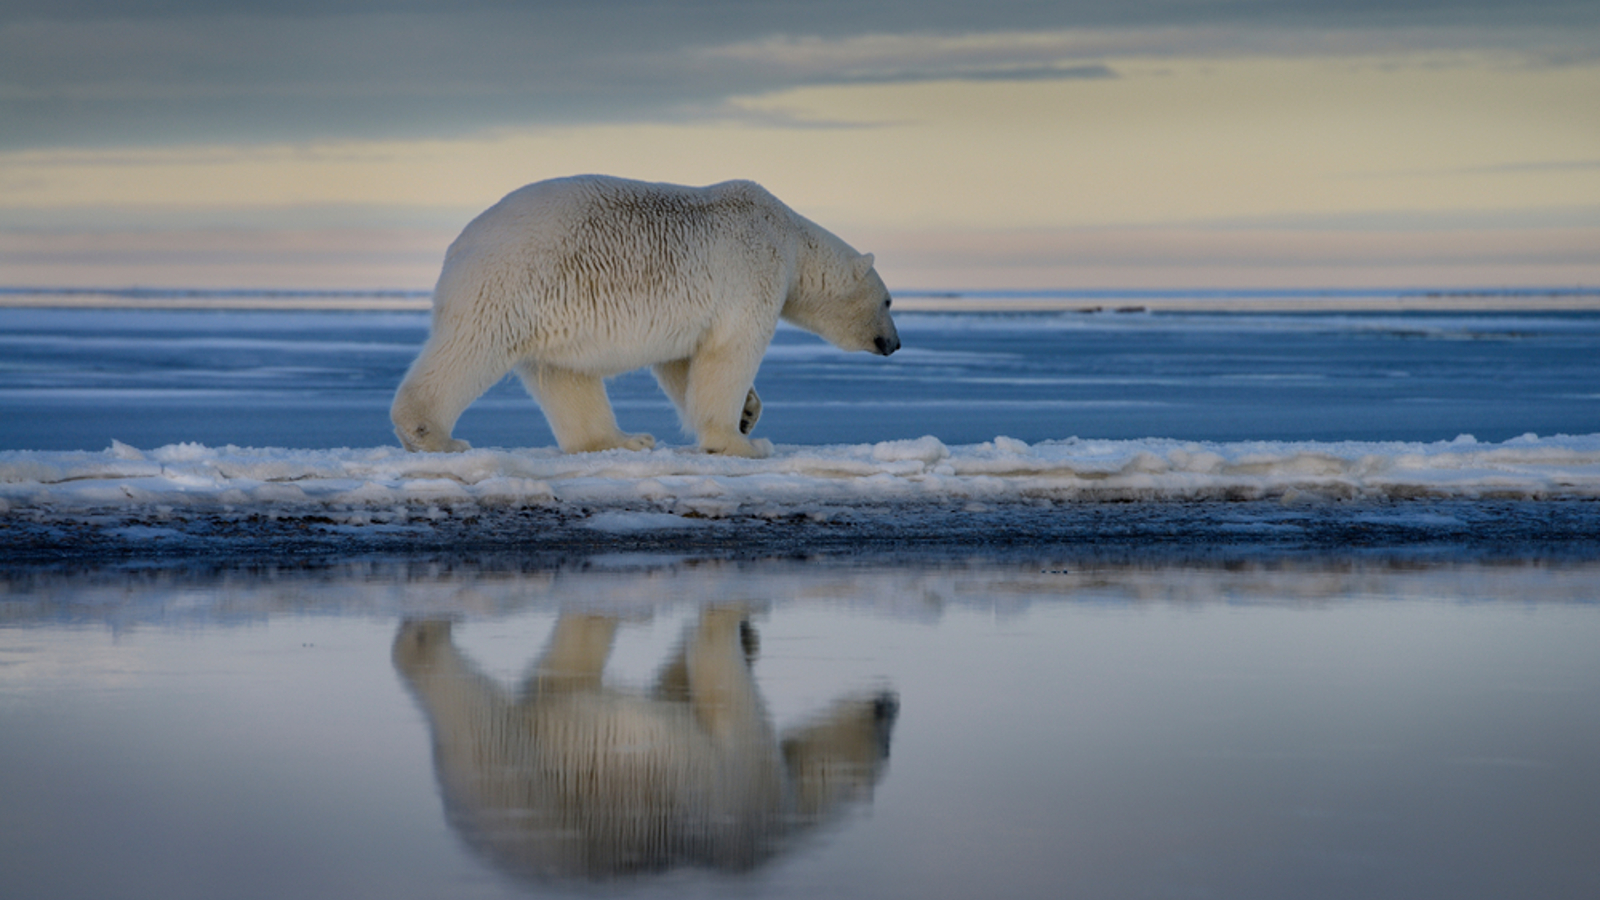 In 'extremely rare' attack, polar bear killed mother and child in Alaska. Now we know why.